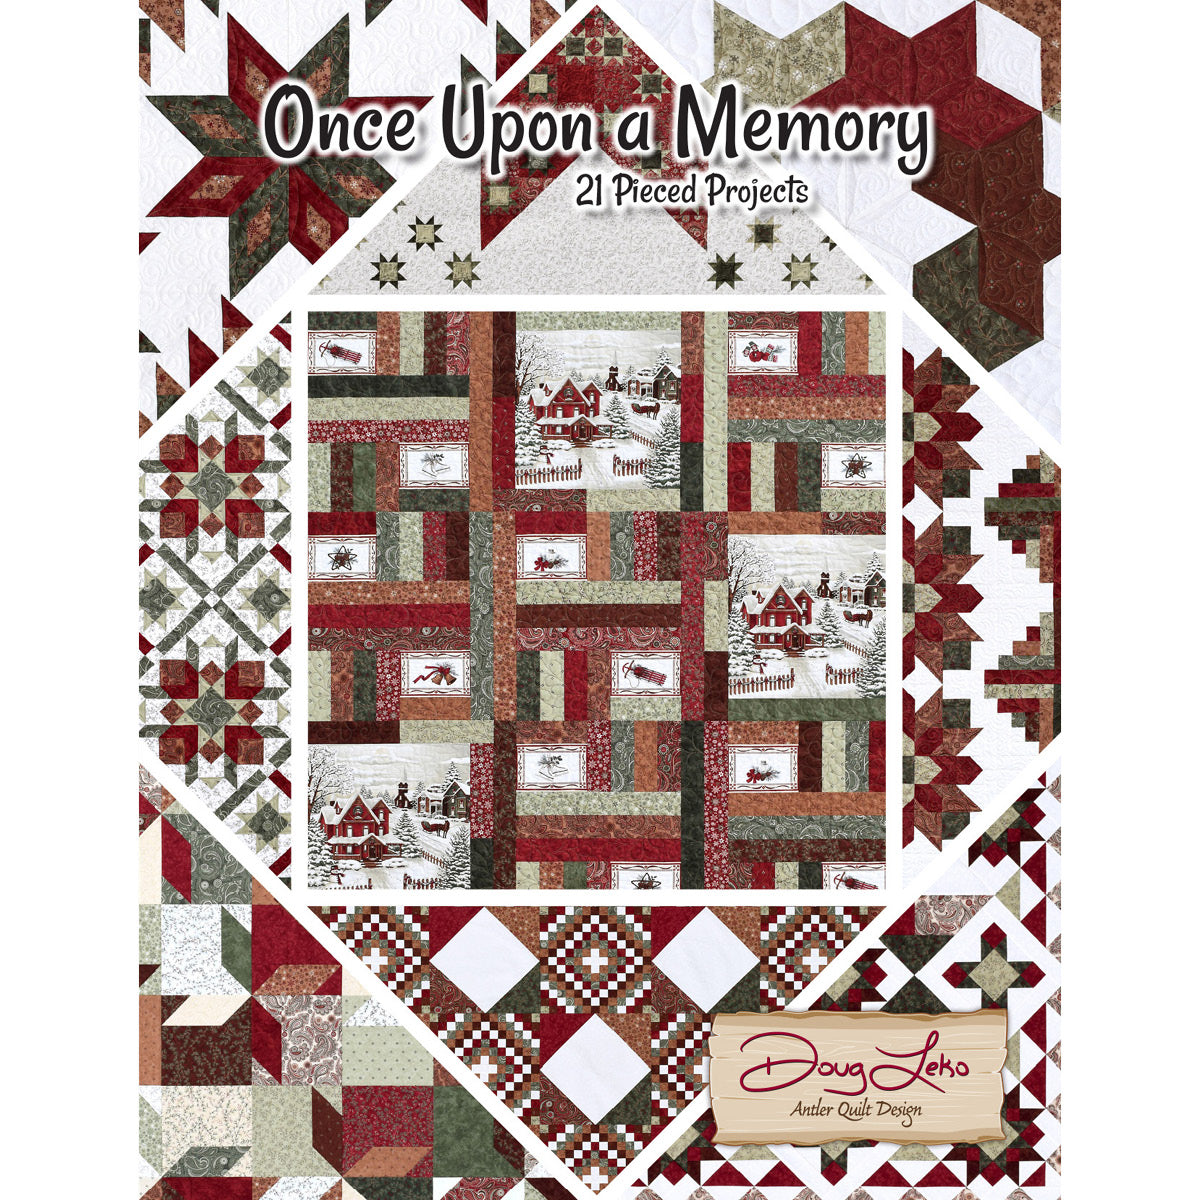 Once Upon A Memory by Doug Leko-Antler Quilt Design-21 Pieced Projects